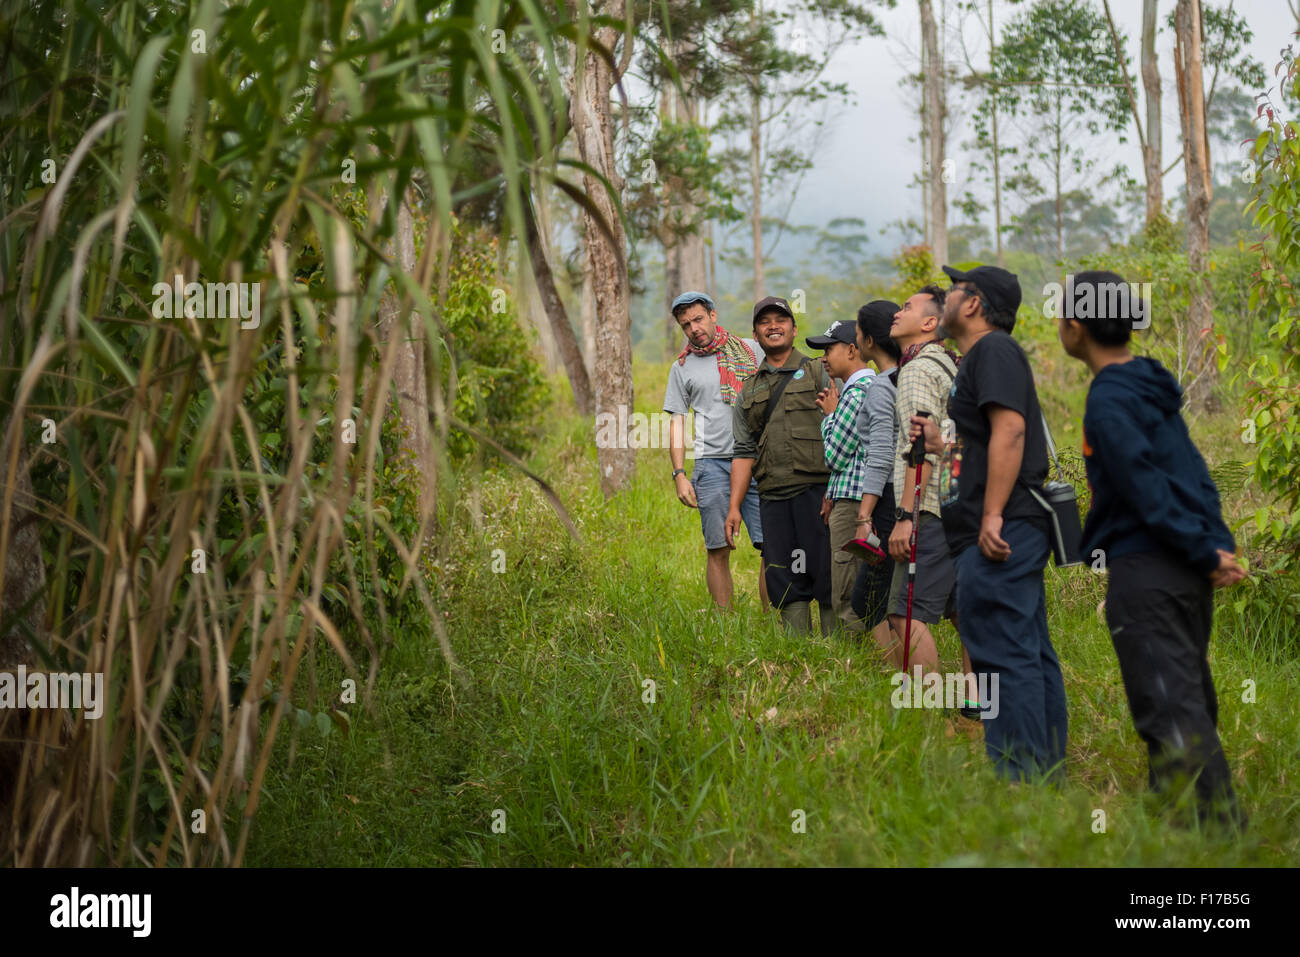 Visitors are given explanations on tree species and reforestation in a reforestation area in Mount Gede Pangrango National Park, West Java, Indonesia. Stock Photo